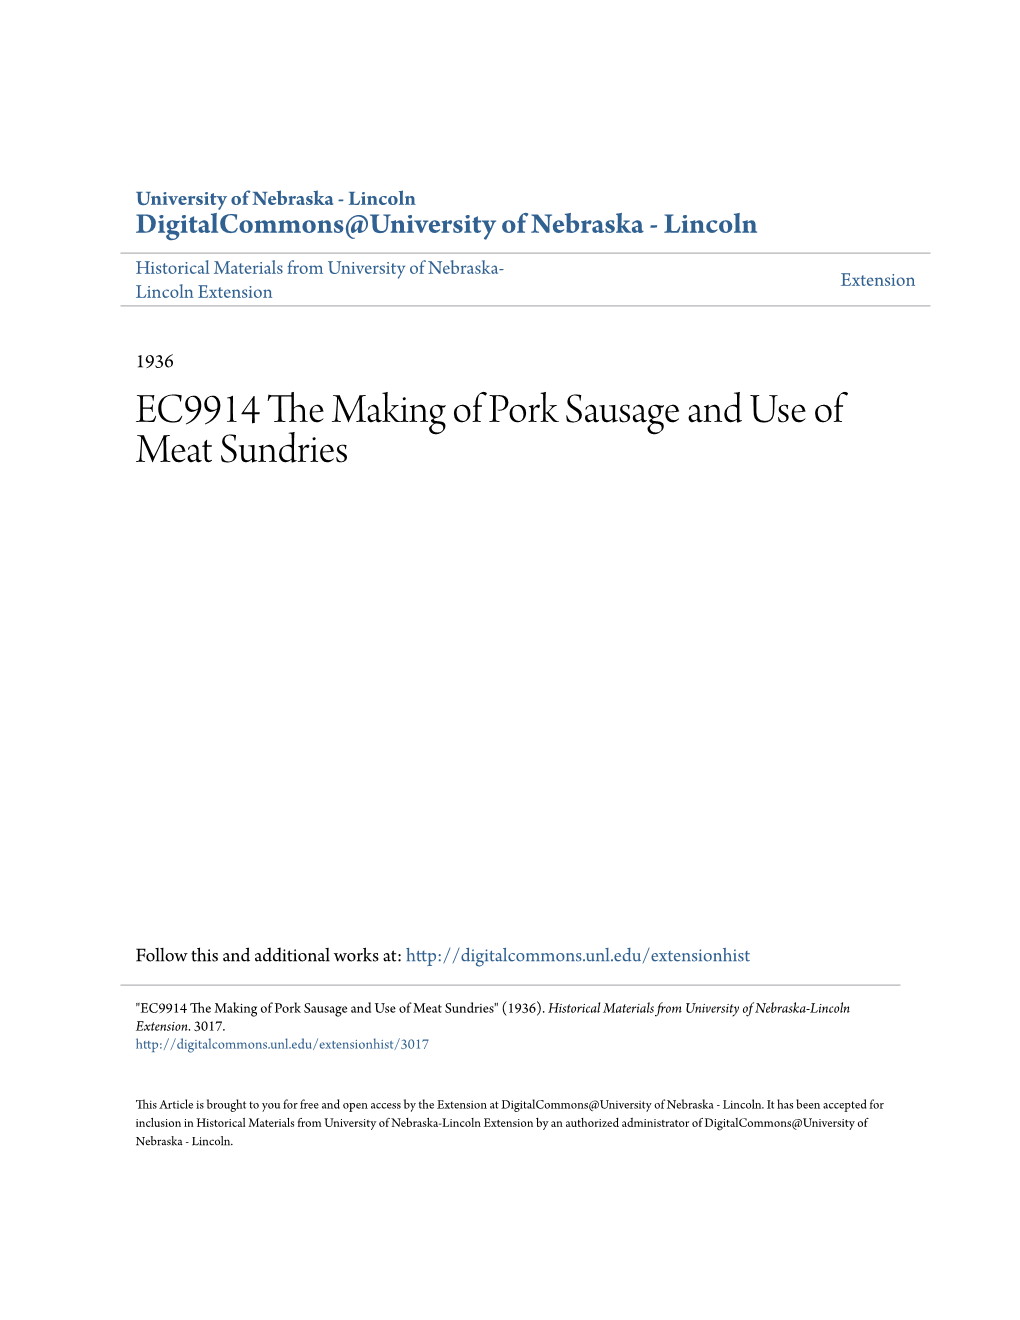 EC9914 the Making of Pork Sausage and Use of Meat Sundries